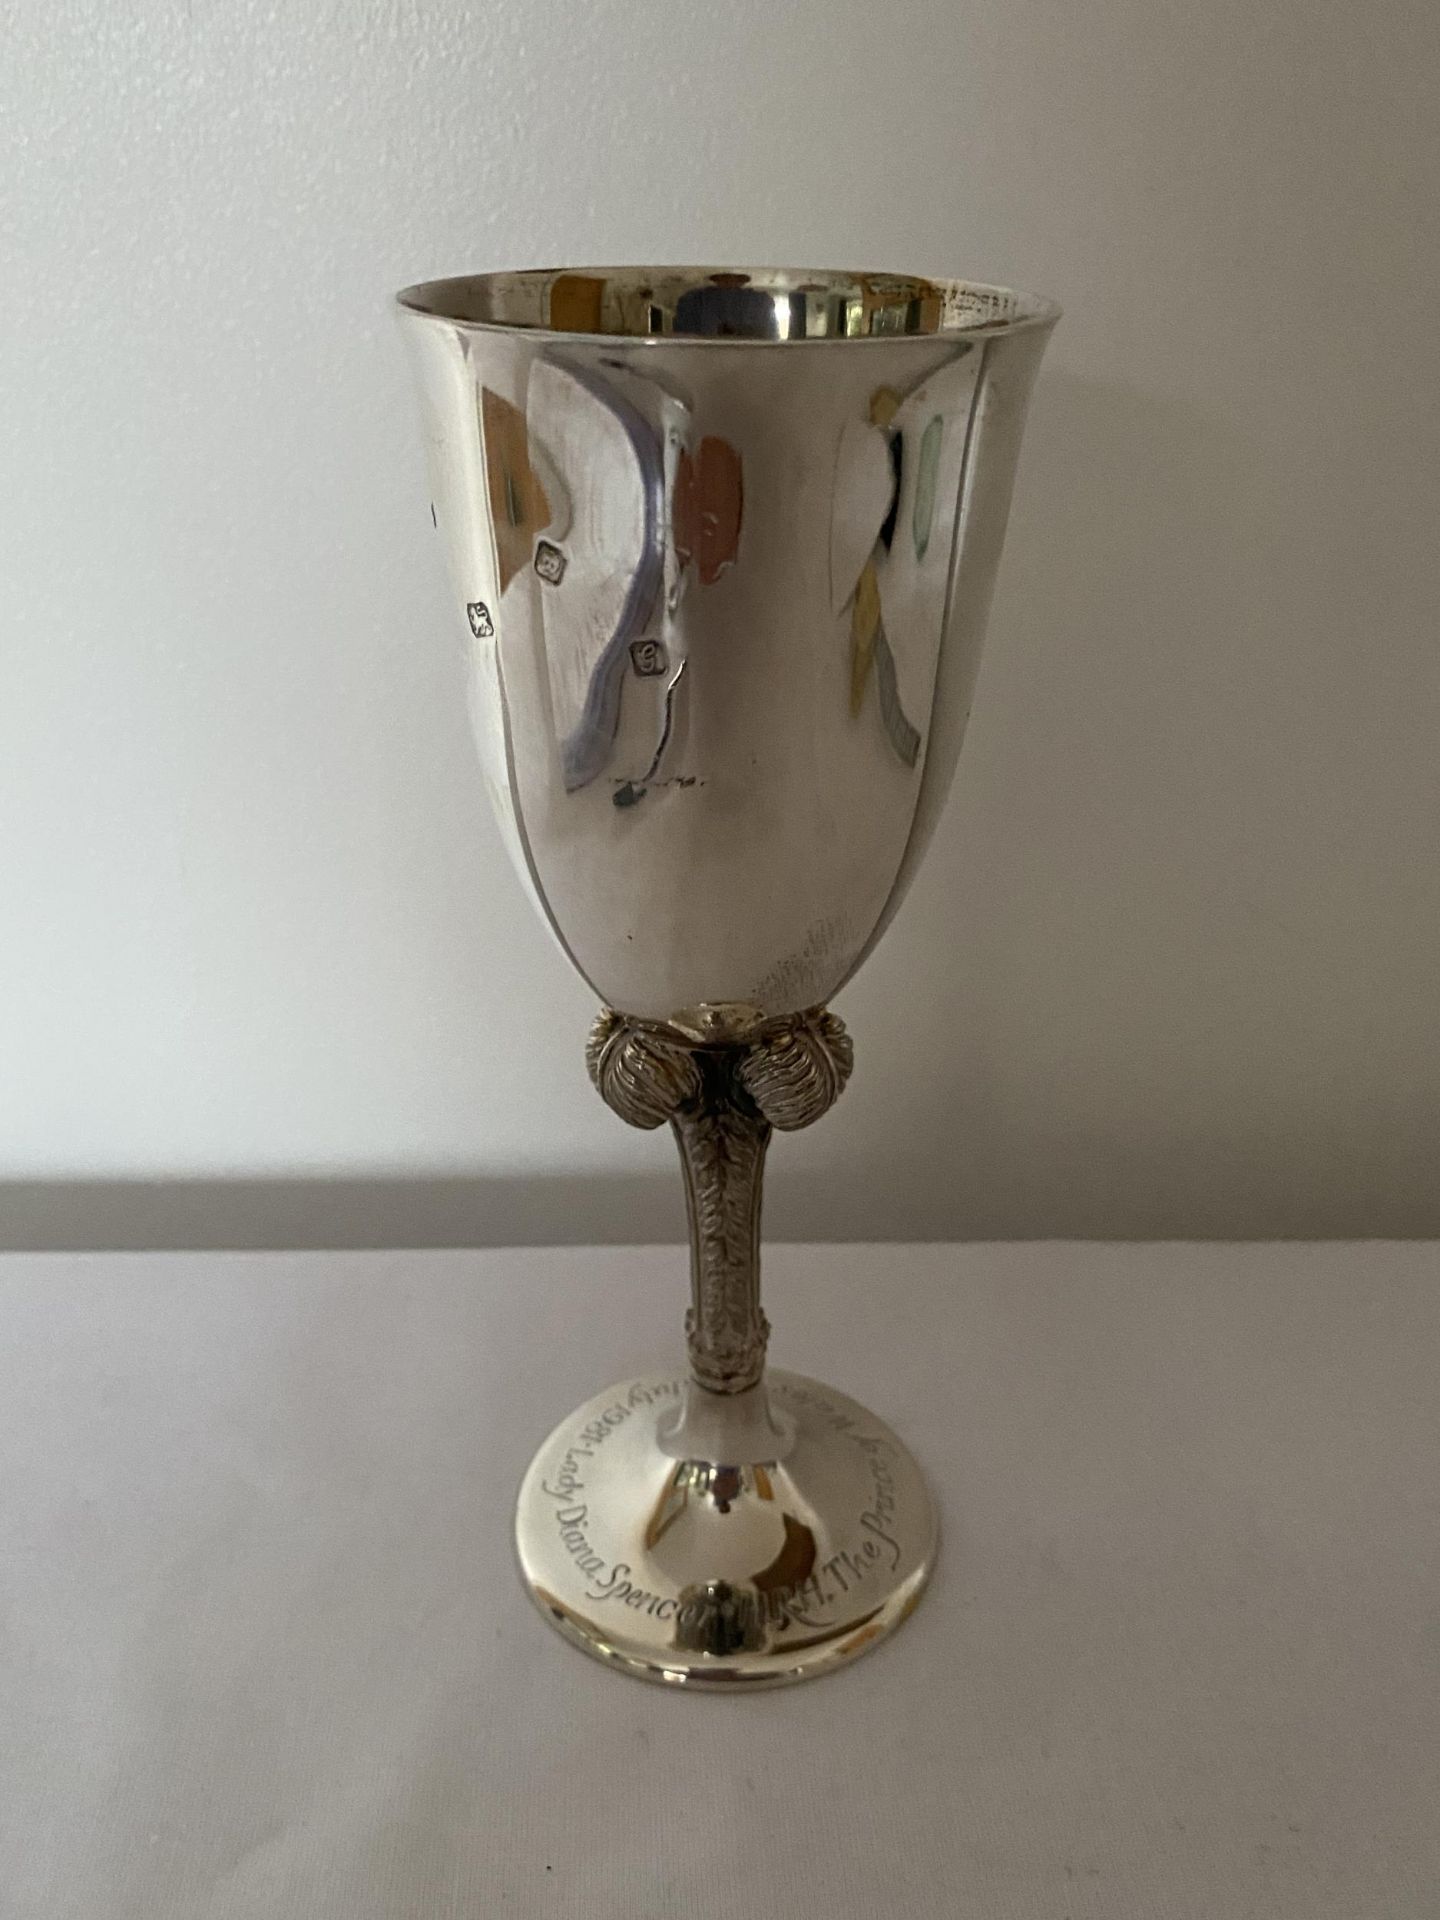 AN ELIZABETH II 1981 HALLMARKED LONDON SILVER COMMEMORATIVE LADY DIANA AND PRINCE CHARLES GOBLET - Image 4 of 24